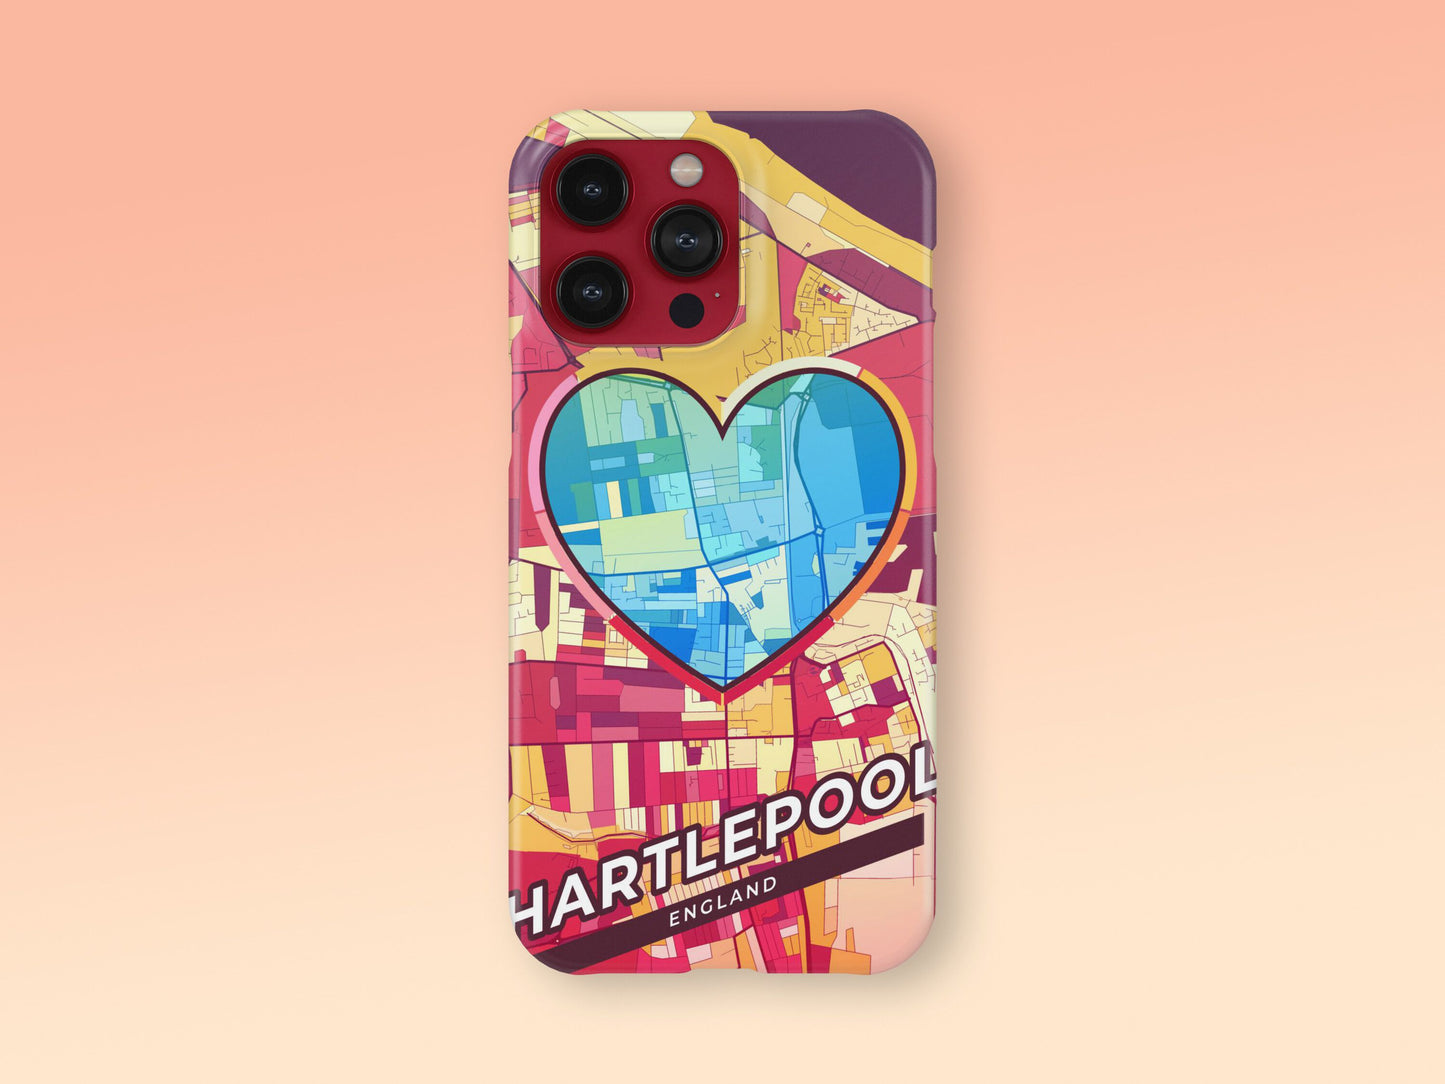 Hartlepool England slim phone case with colorful icon. Birthday, wedding or housewarming gift. Couple match cases. 2